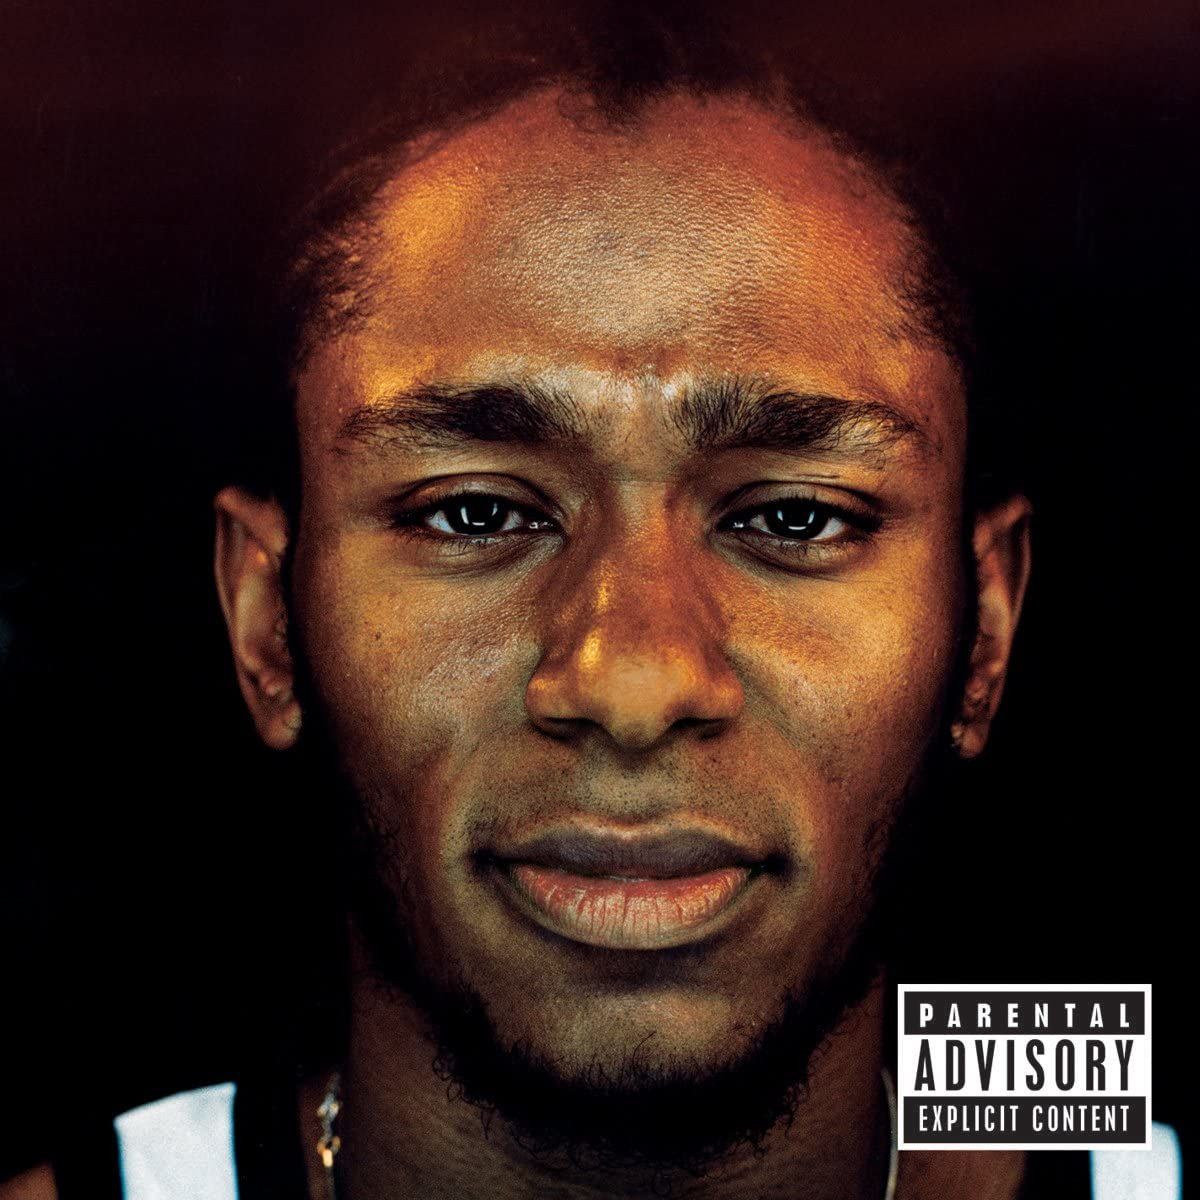 yasiin-bey-mos-def-910x512 - Institute of the Black World 21st Century